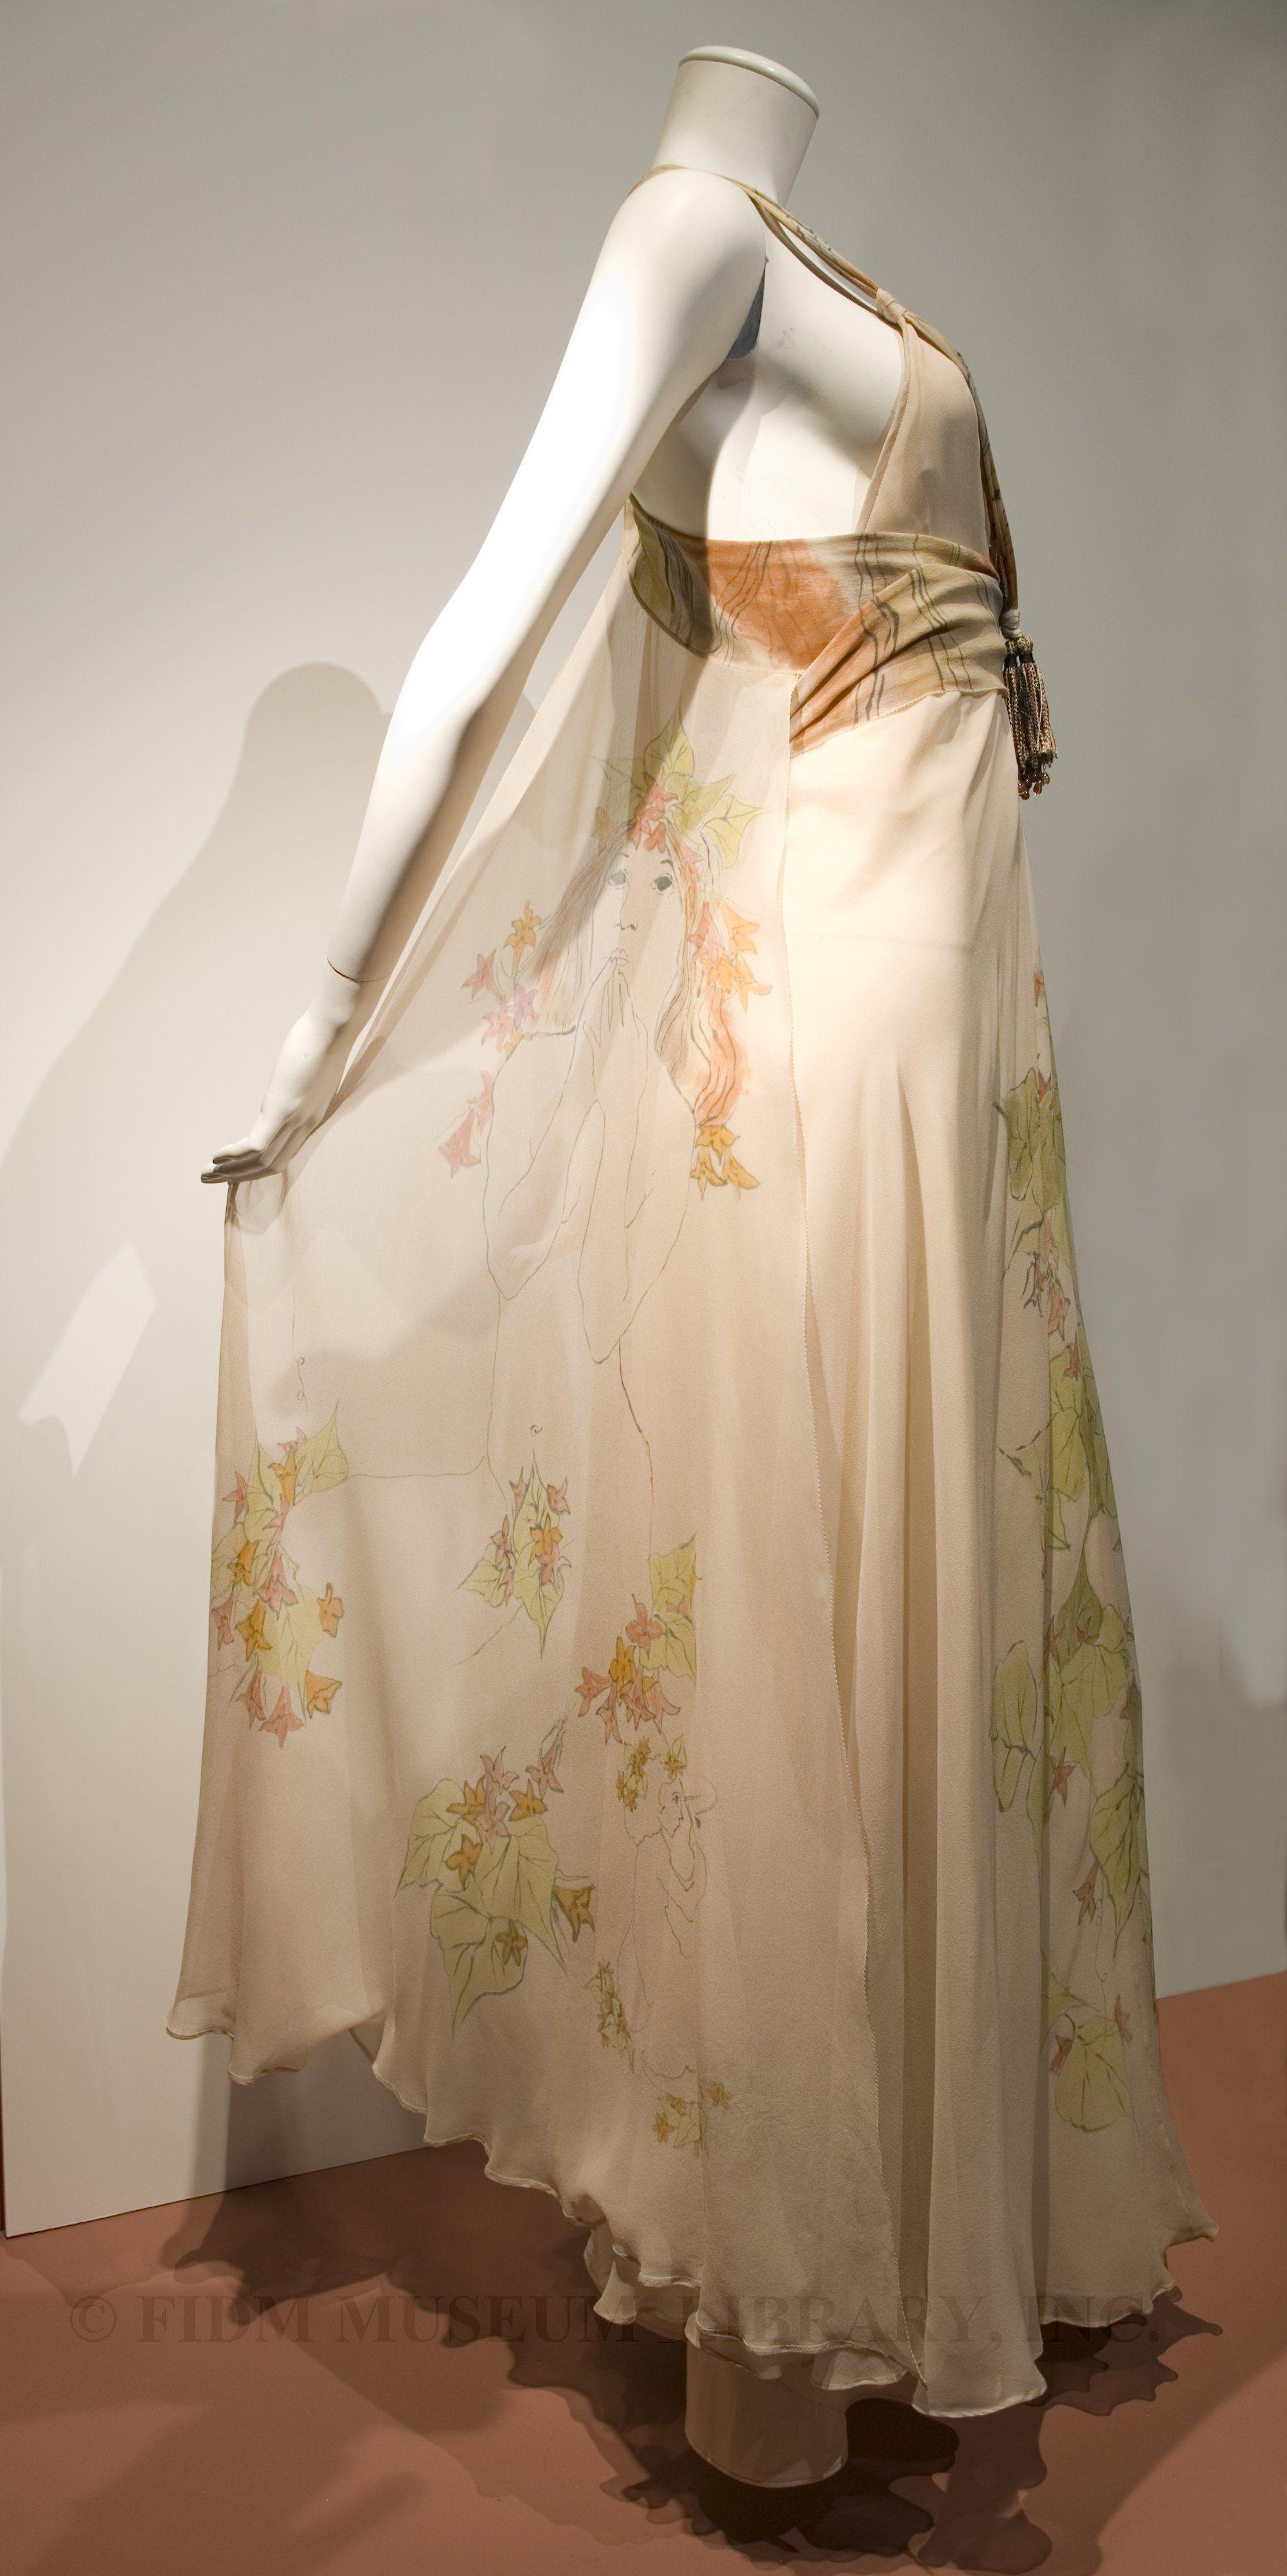 Clothing of a Harp Logo - FIDM Museum Blog: Holly's Harp Hand Painted Evening Gown